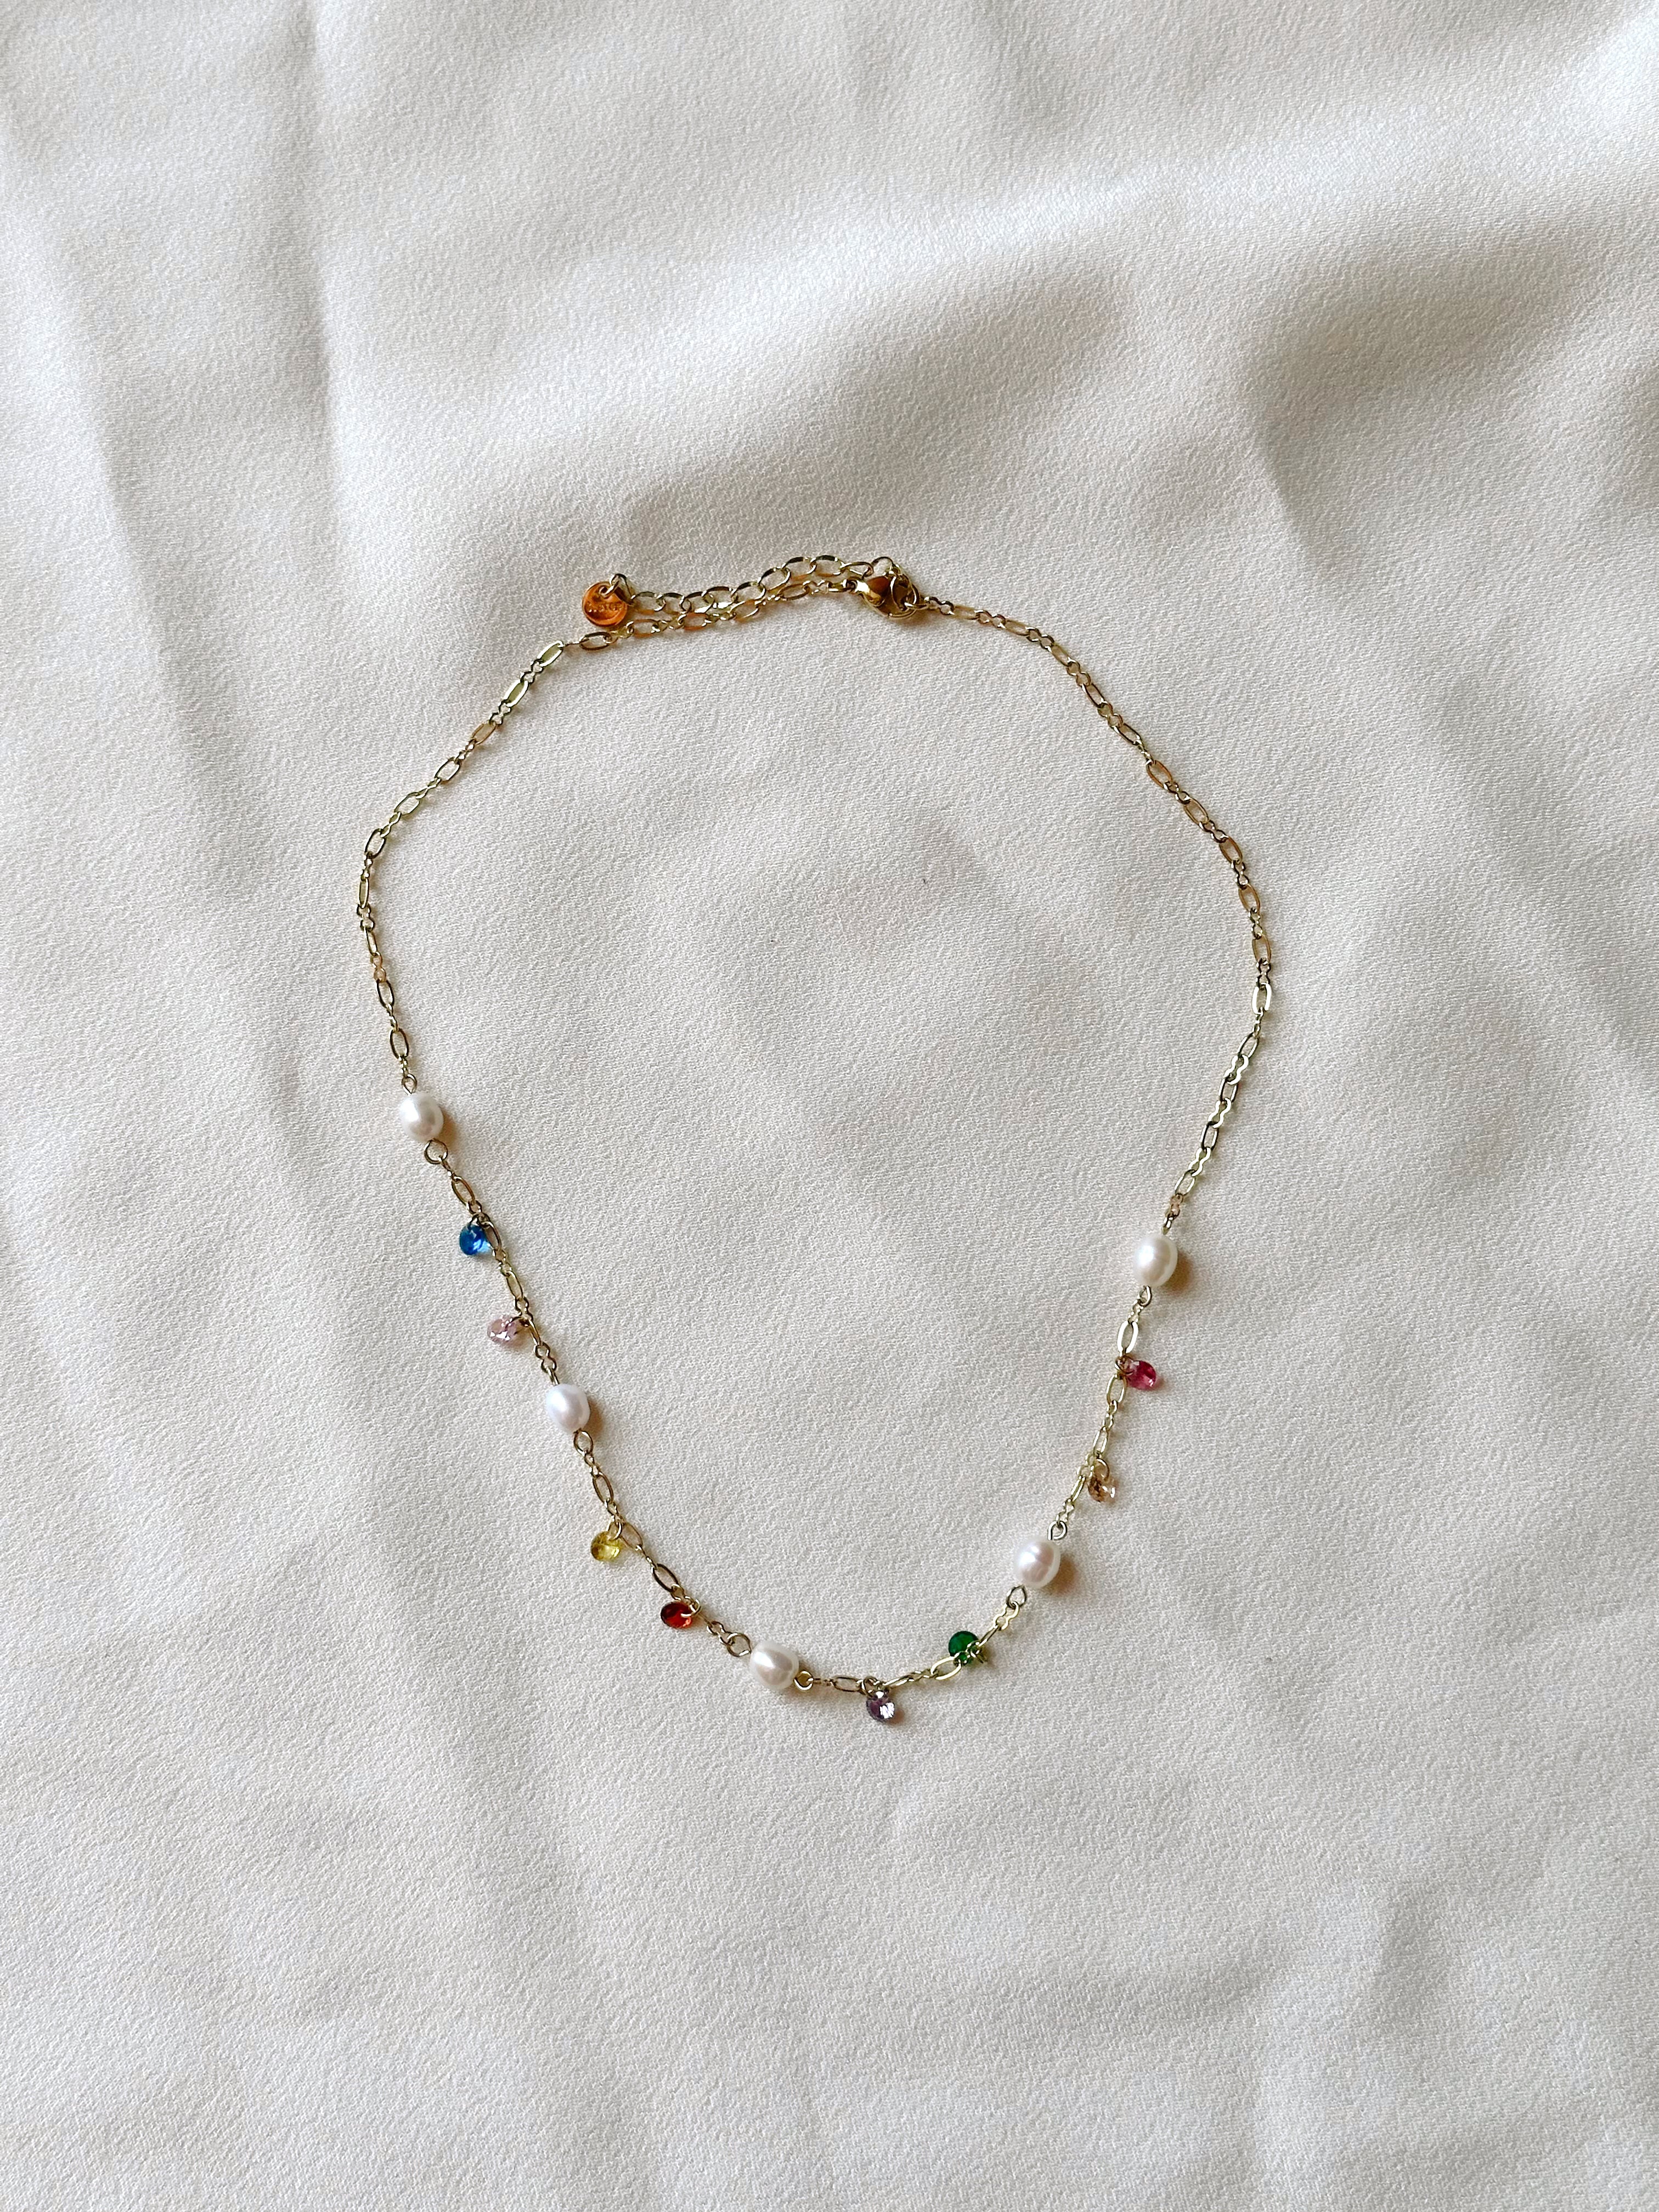 Bejeweled Necklace